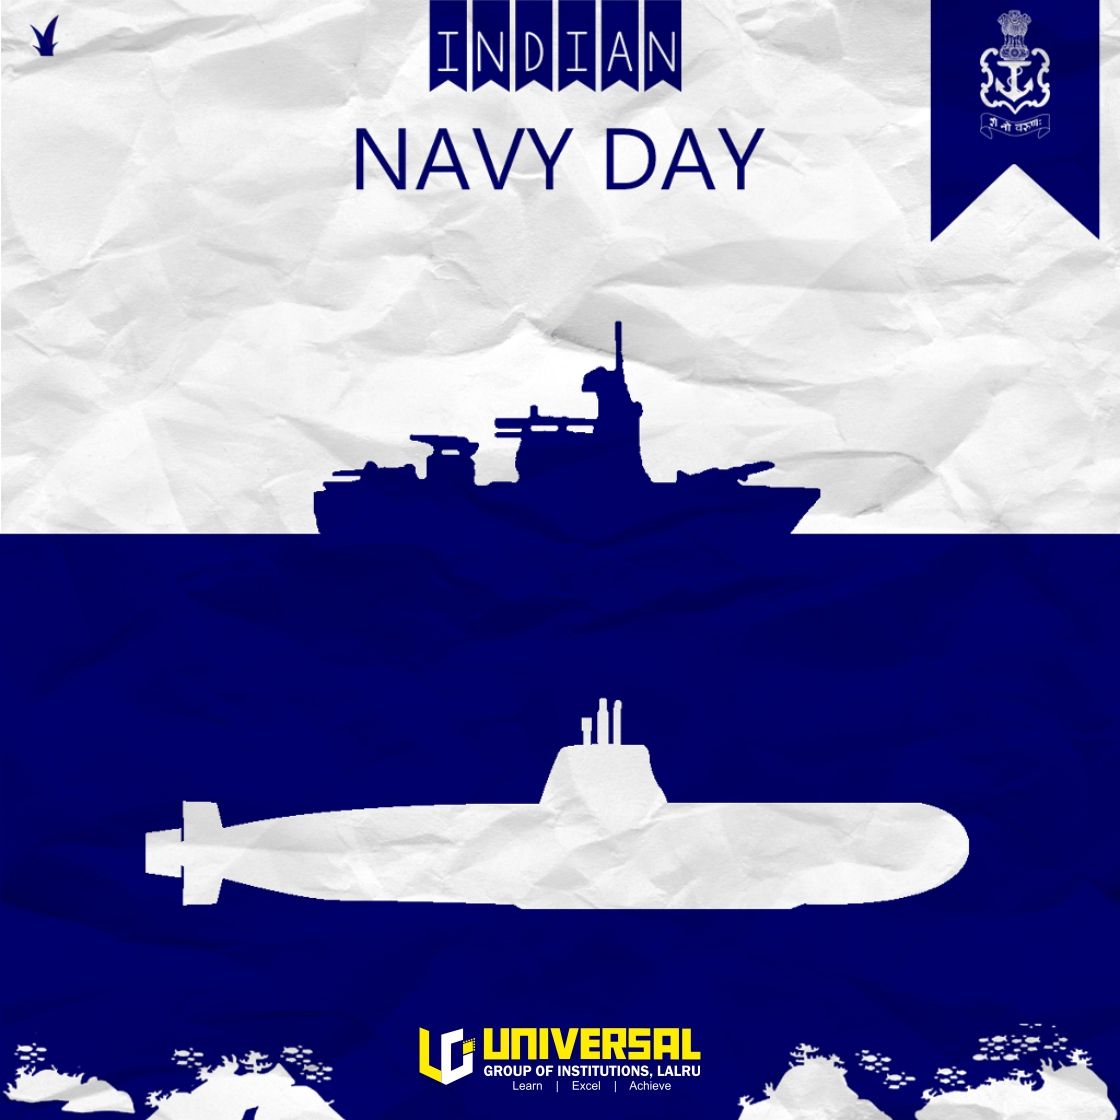 UGI joins Nation this Navy Day to salute and celebrate the 45th anniversary of the Indian navy this 4 December in order to. Navy day, Indian navy day, Indian navy